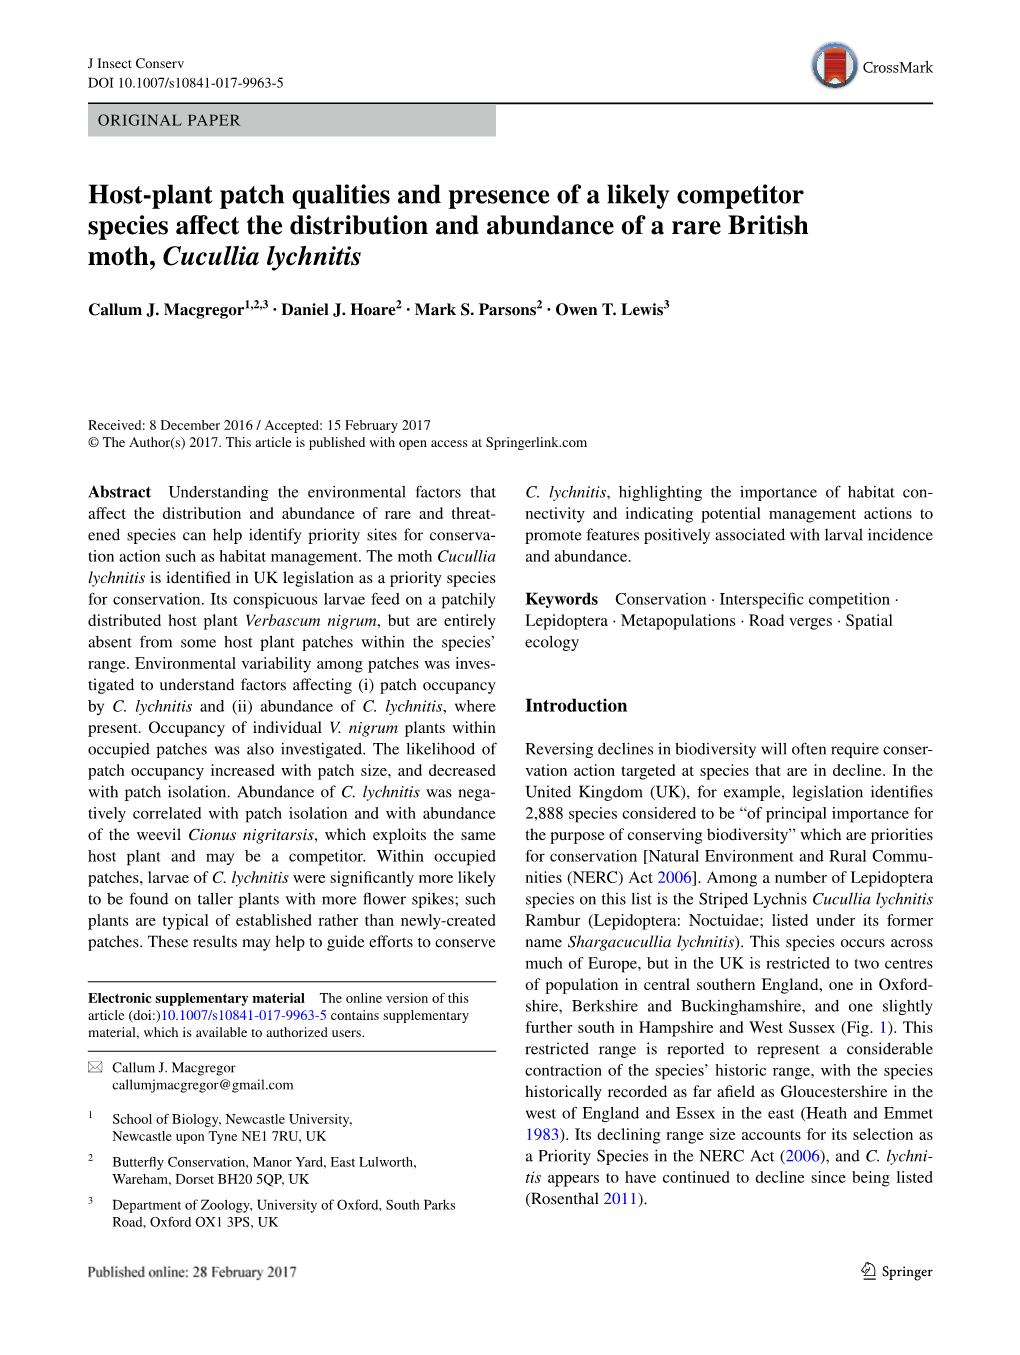 Host-Plant Patch Qualities and Presence of a Likely Competitor Species Affect the Distribution and Abundance of a Rare British Moth, Cucullia Lychnitis